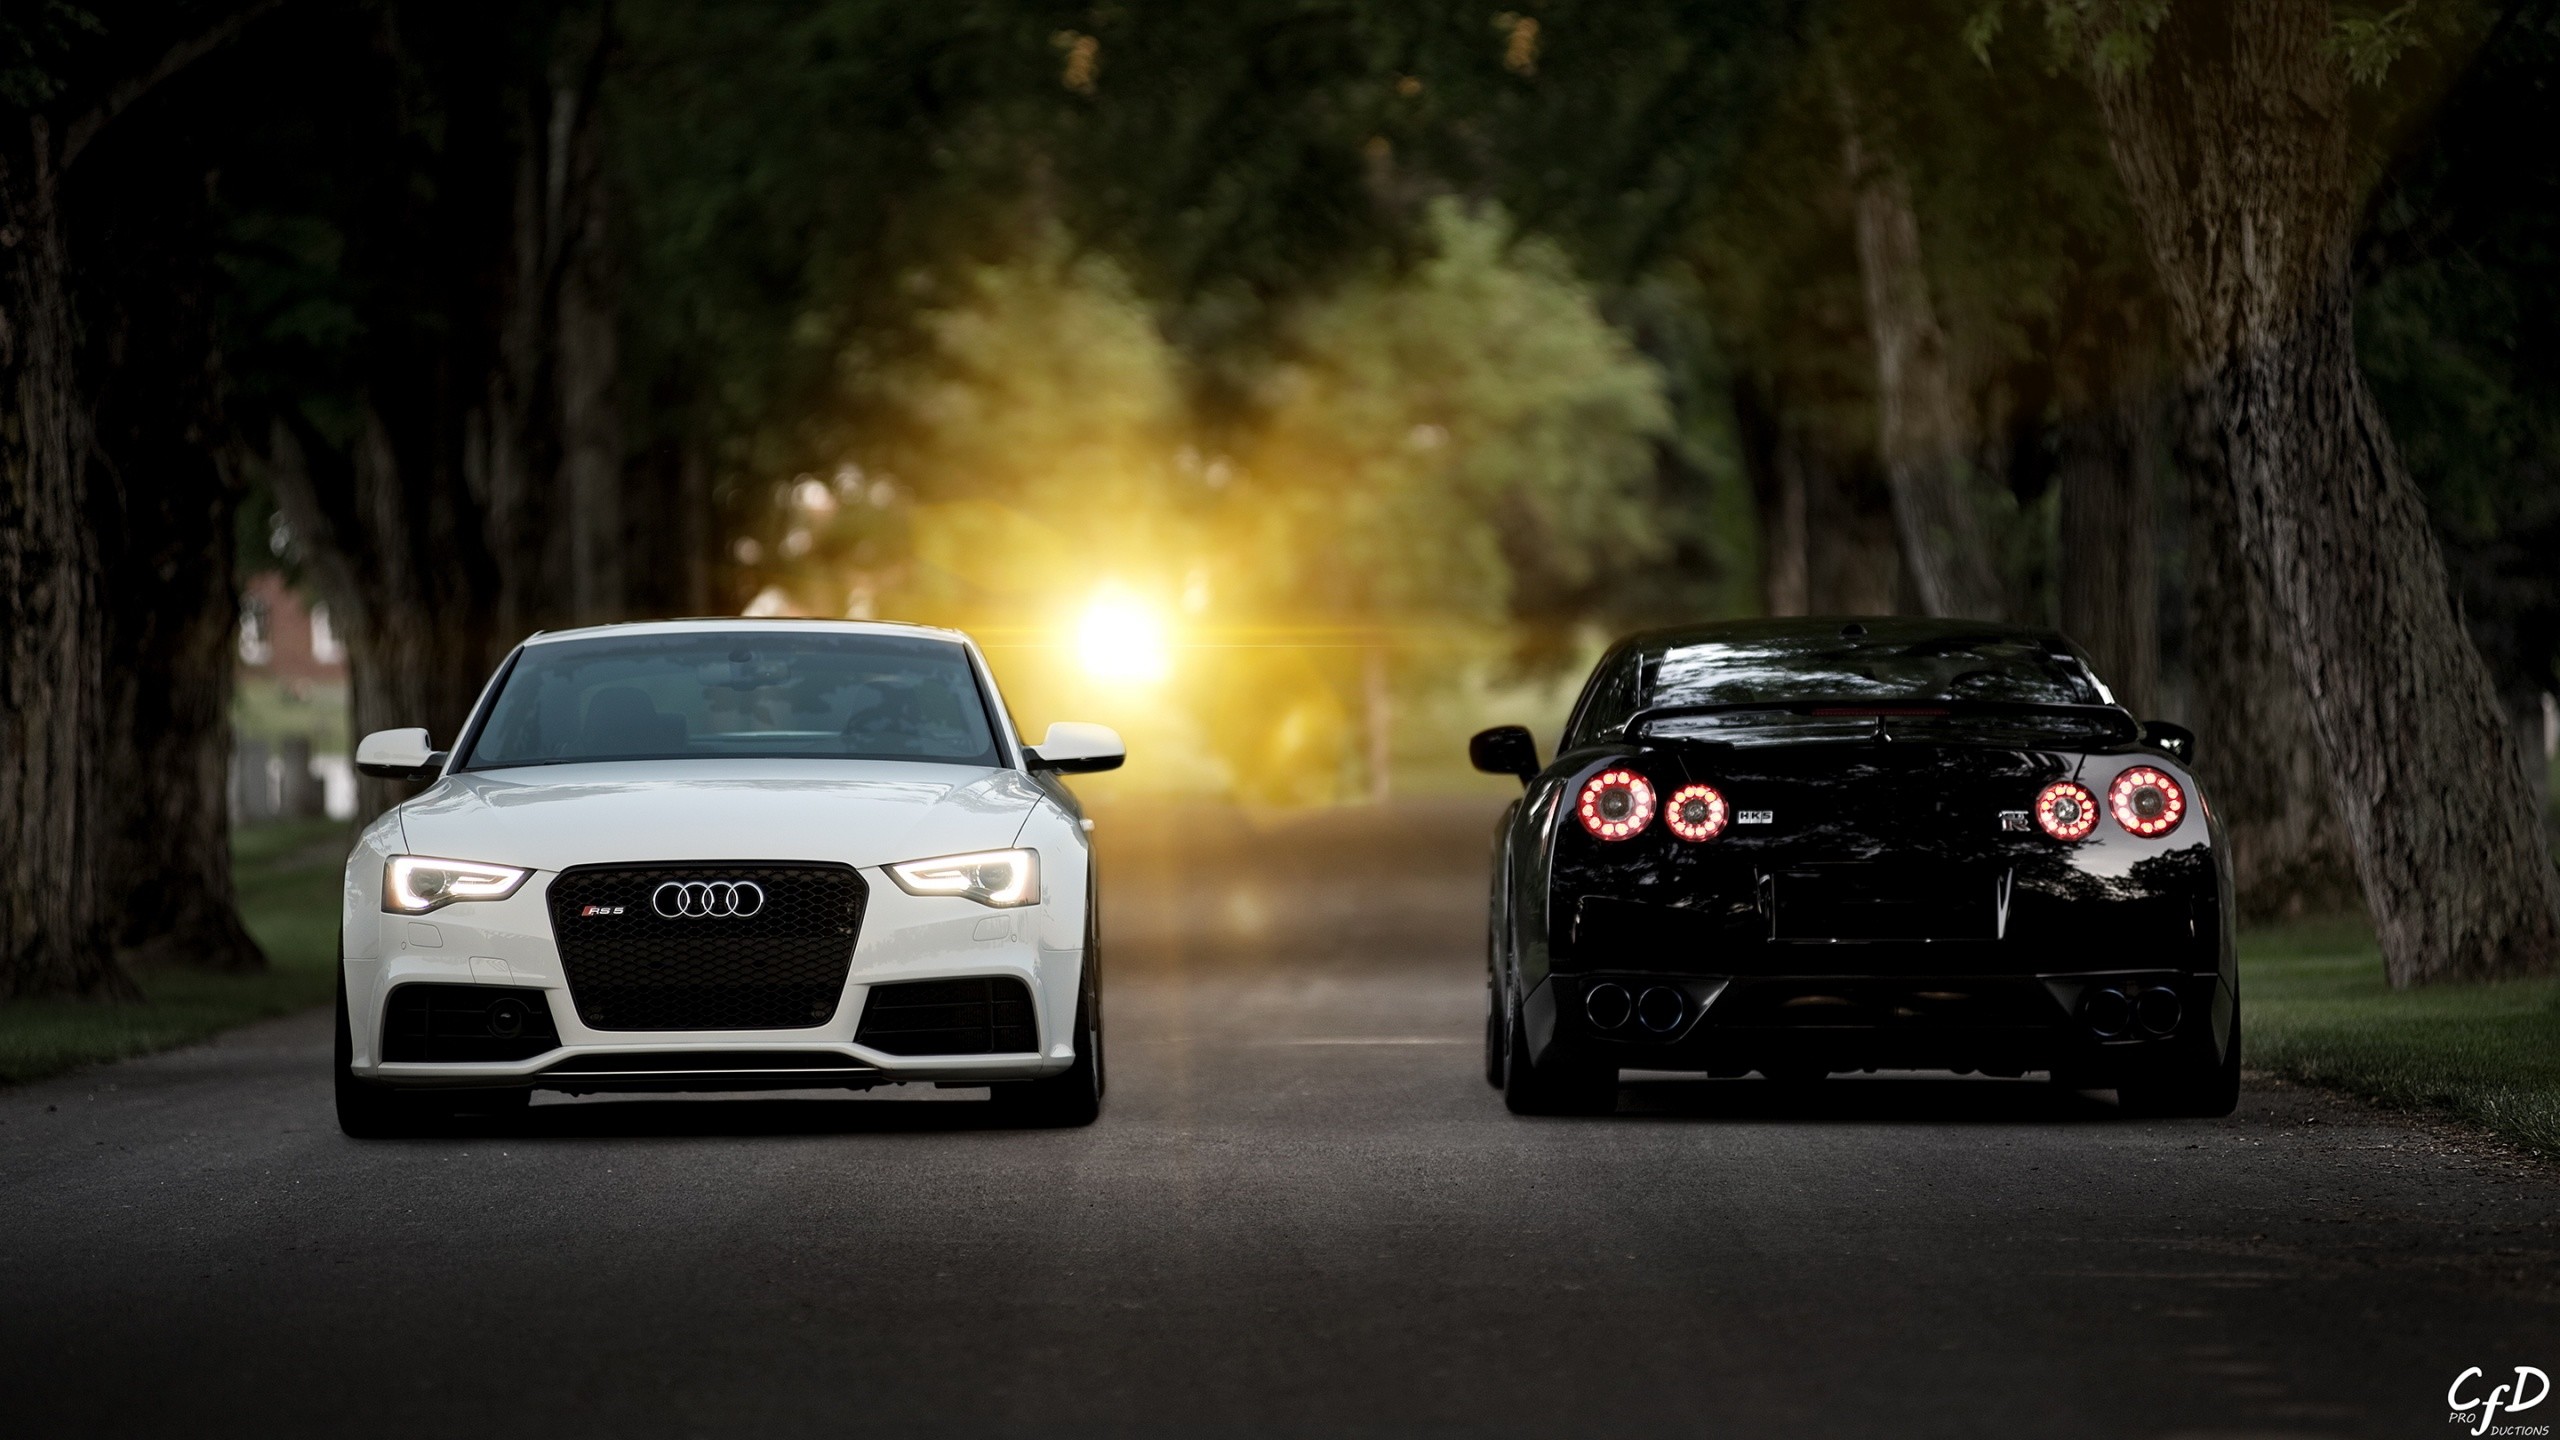 2560x1440 Nissan GT-R and Audi Rs5 Wallpapers